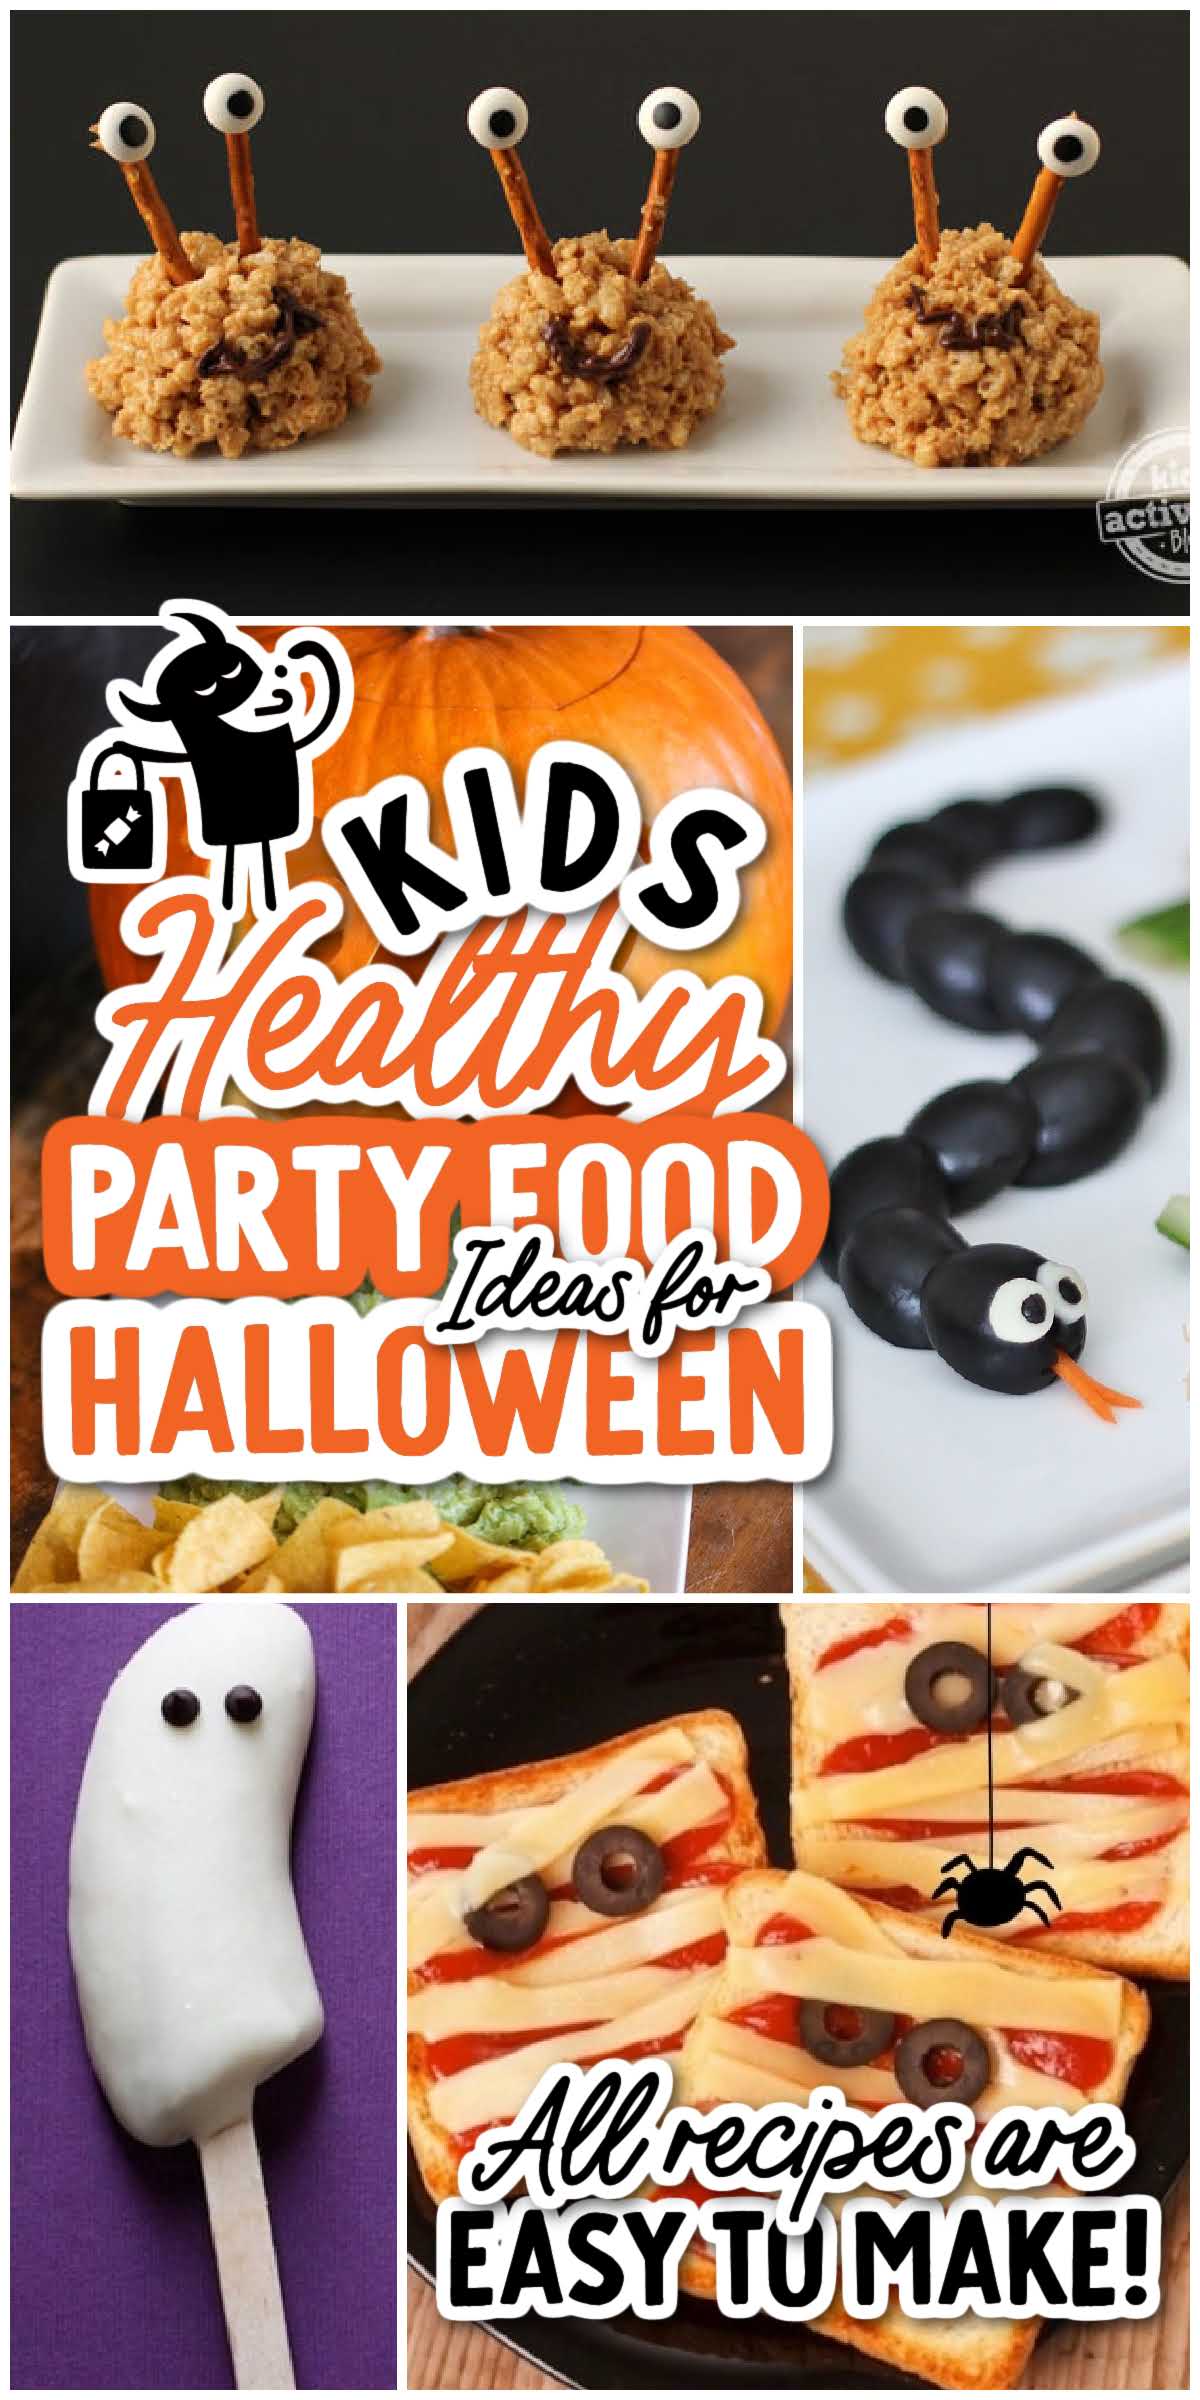 15 Kids Healthy Party Food Ideas For Halloween - Spaceships and Laser Beams